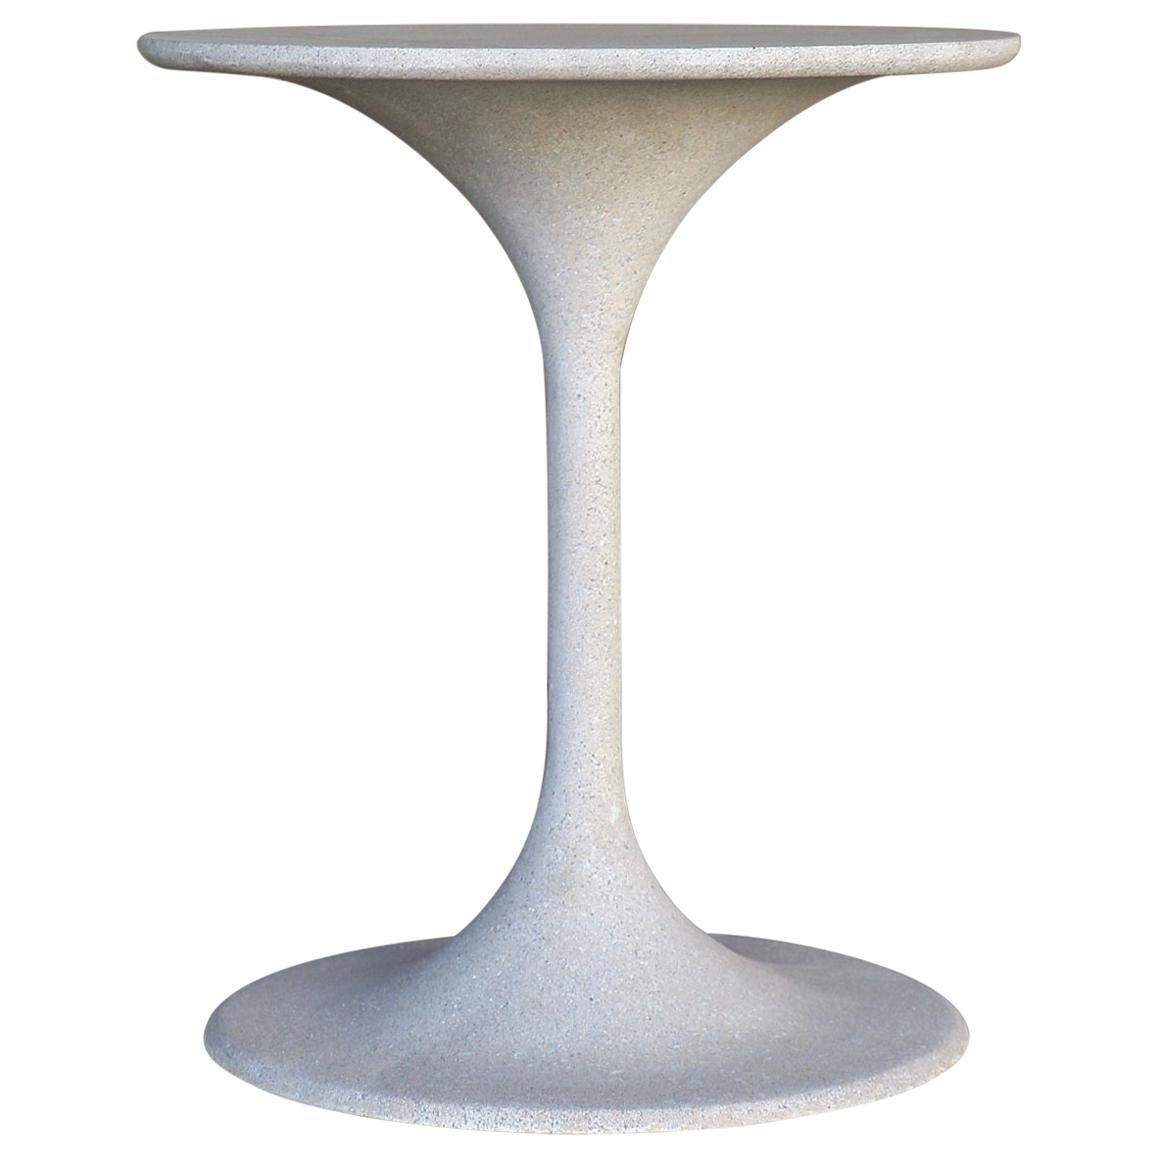 Cast Resin 'Spindle' Side Table, Aged Stone Finish by Zachary A. Design